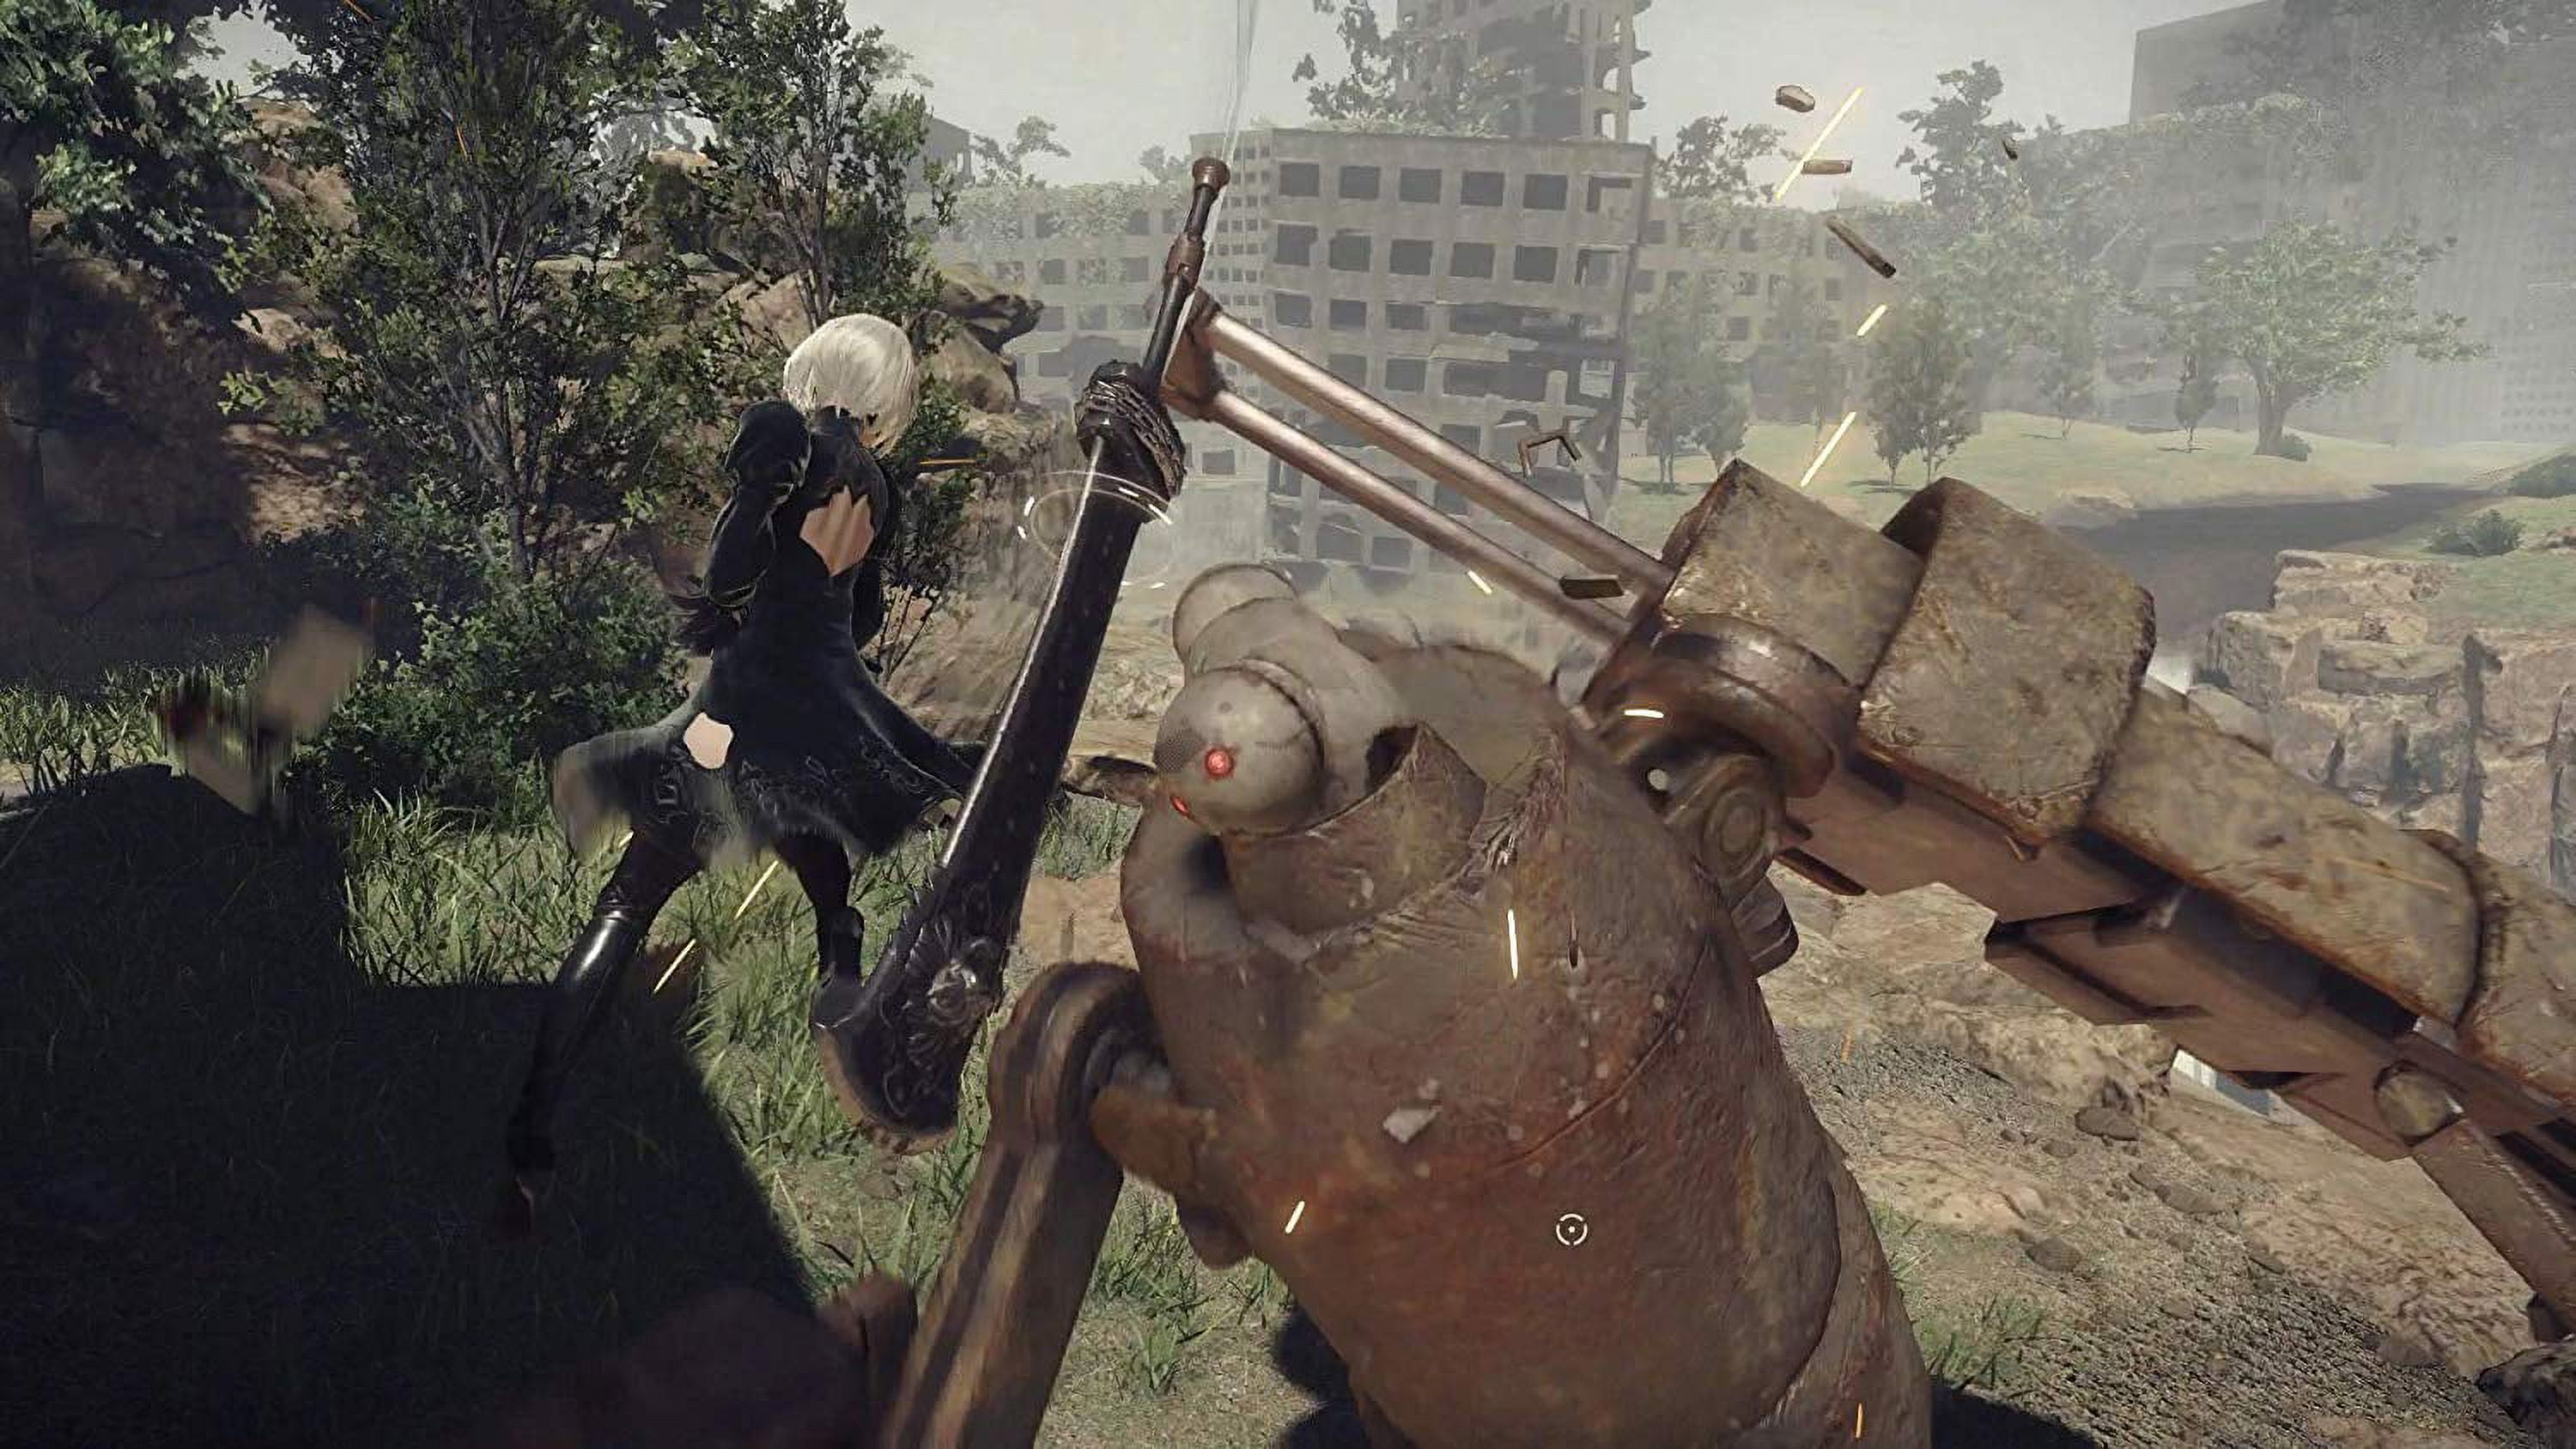 Game of the yorha edition